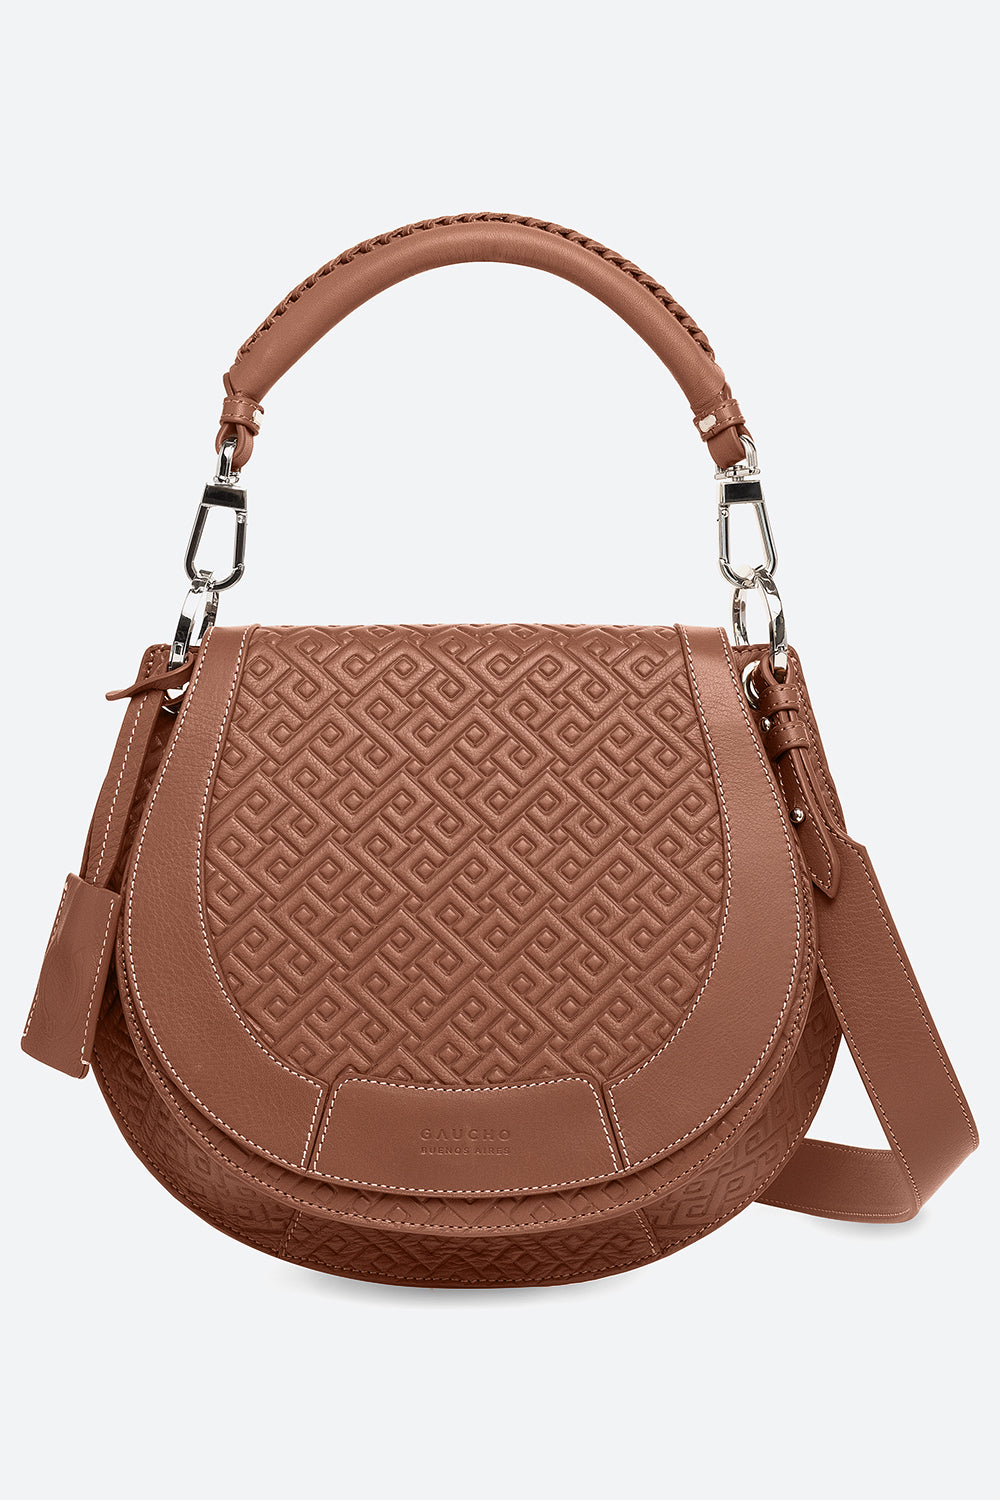 The Lucky Bag, Embossed Leather Saddle Bag in Cognac